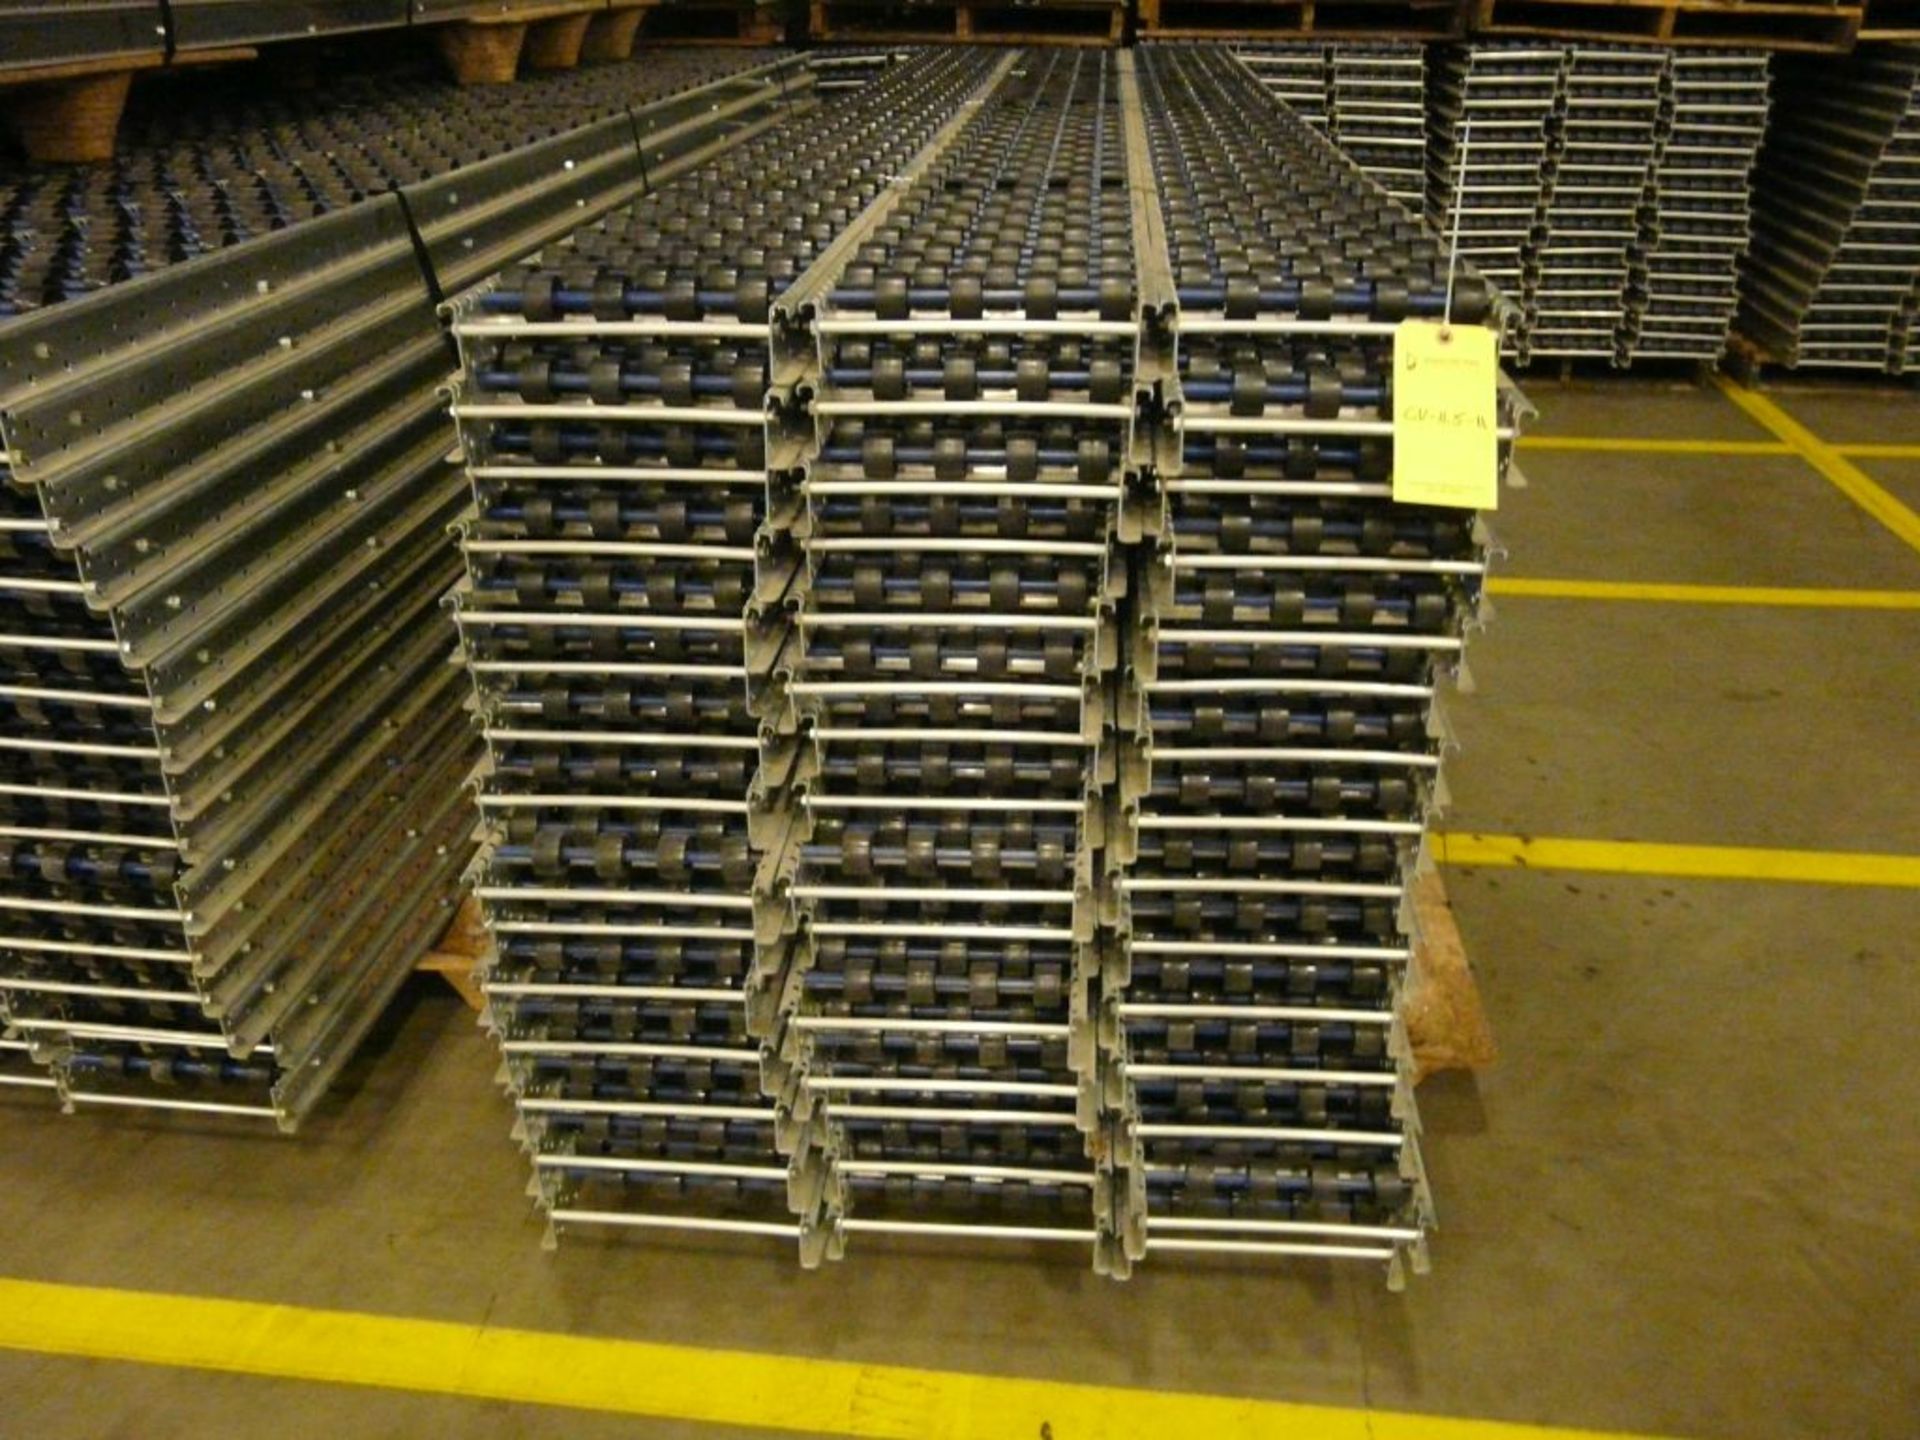 Lot of (90) SpanTrack Wheelbed Carton Flow Conveyors - 11.5'L x 11"W; Tag: 223641 - $30 Lot - Image 2 of 4